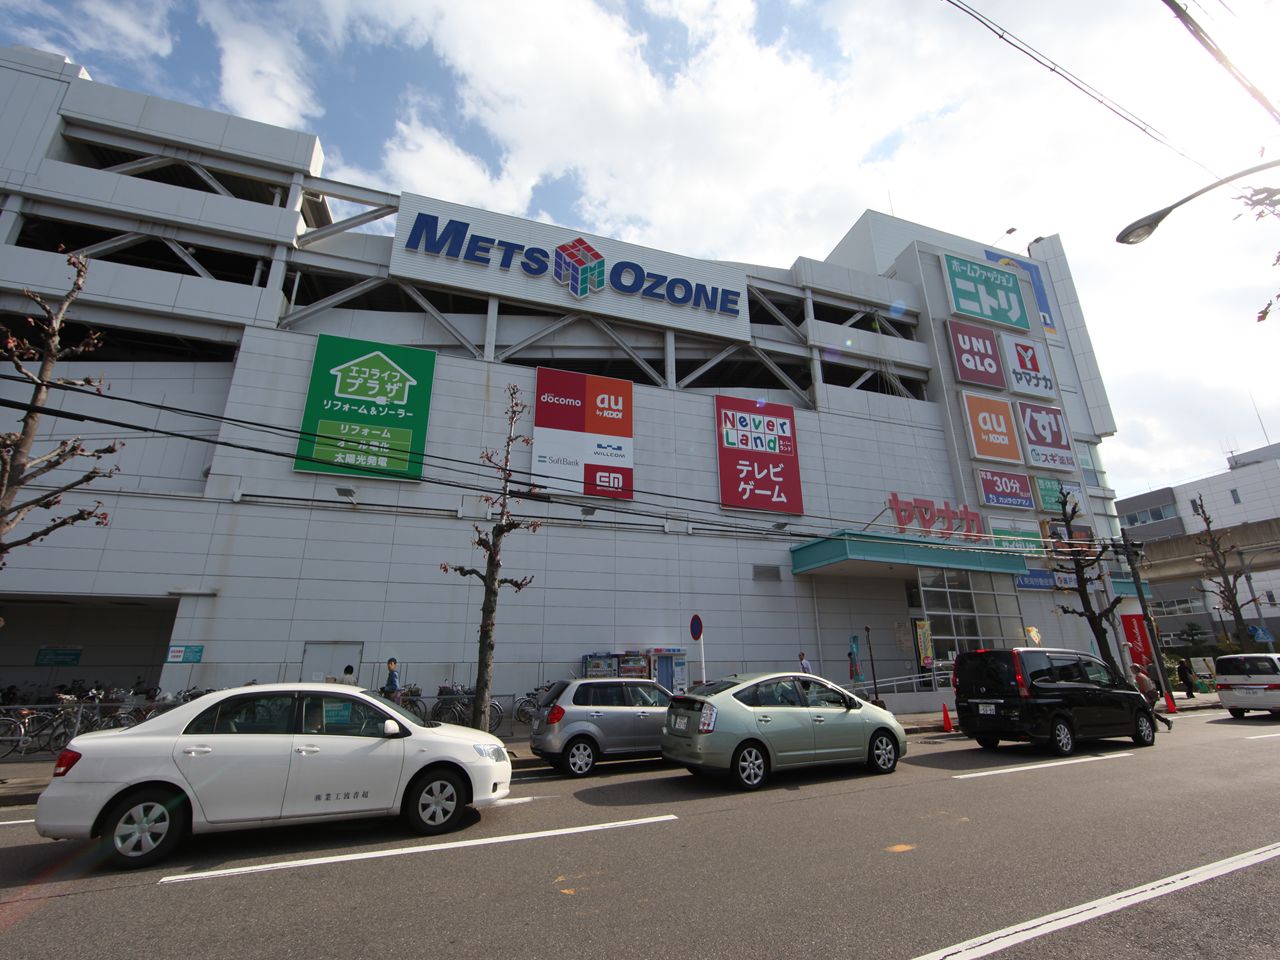 Shopping centre. Mets Ozone (Yamanaka ・ Cedar pharmacy ・ Uniqlo ・ Nitori, etc. store Yes) (609m from the shopping center)